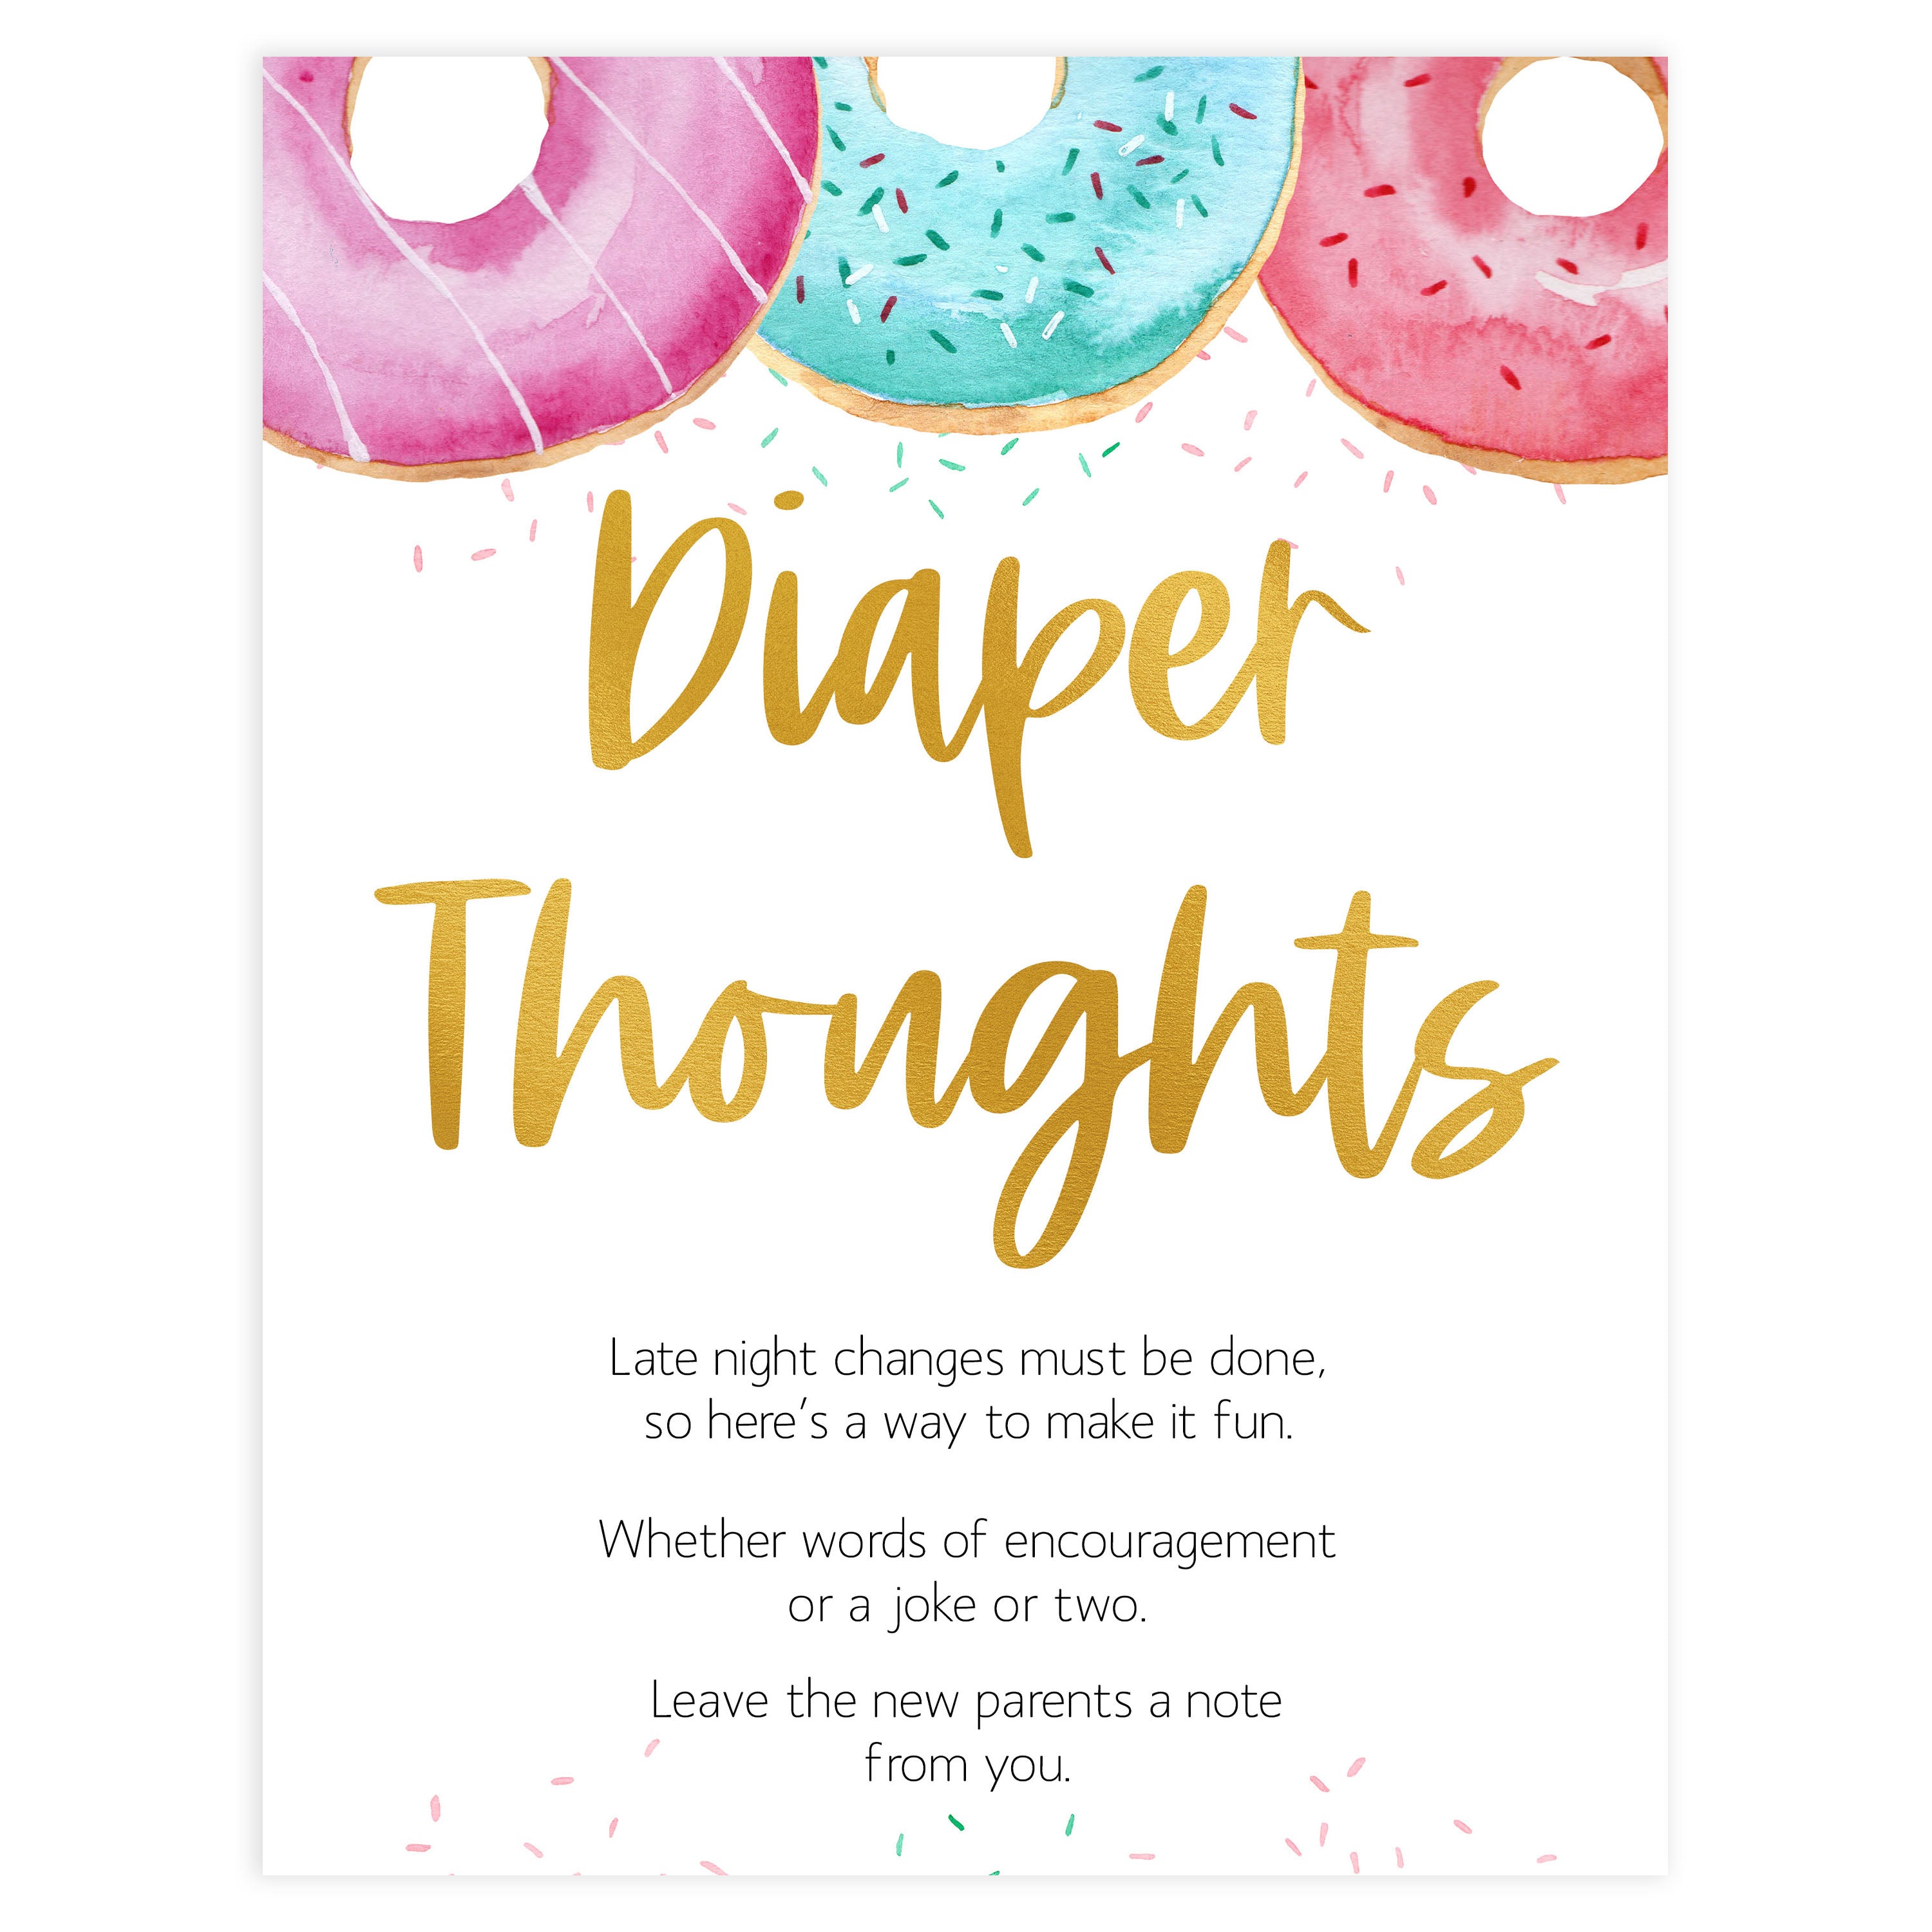 diaper thoughts baby game, Printable baby shower games, donut baby games, baby shower games, fun baby shower ideas, top baby shower ideas, donut sprinkles baby shower, baby shower games, fun donut baby shower ideas